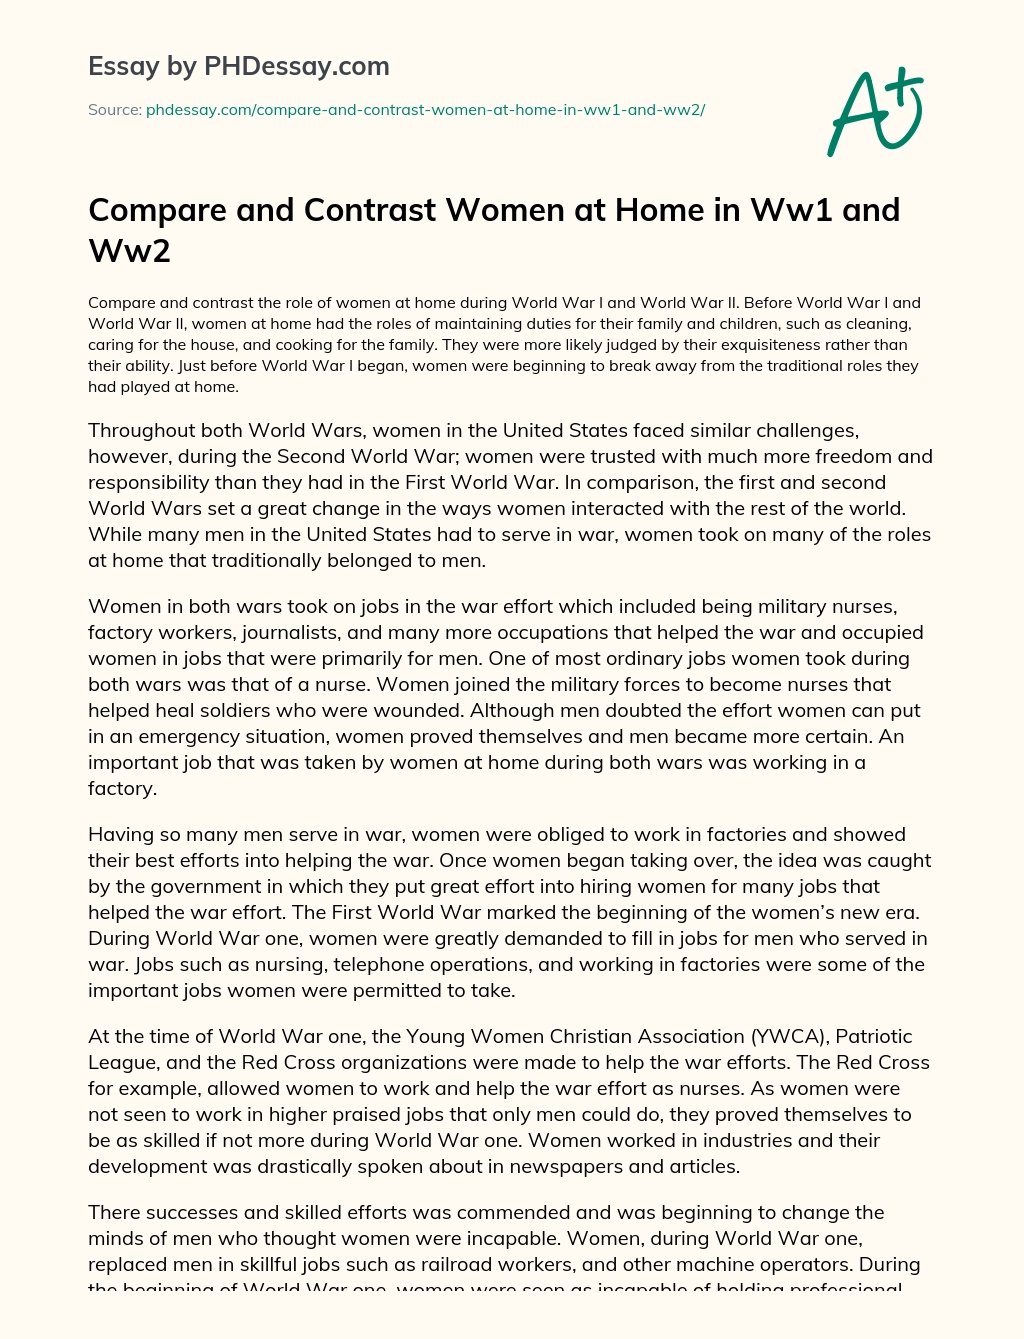 Compare and Contrast Women at Home in Ww1 and Ww2 essay